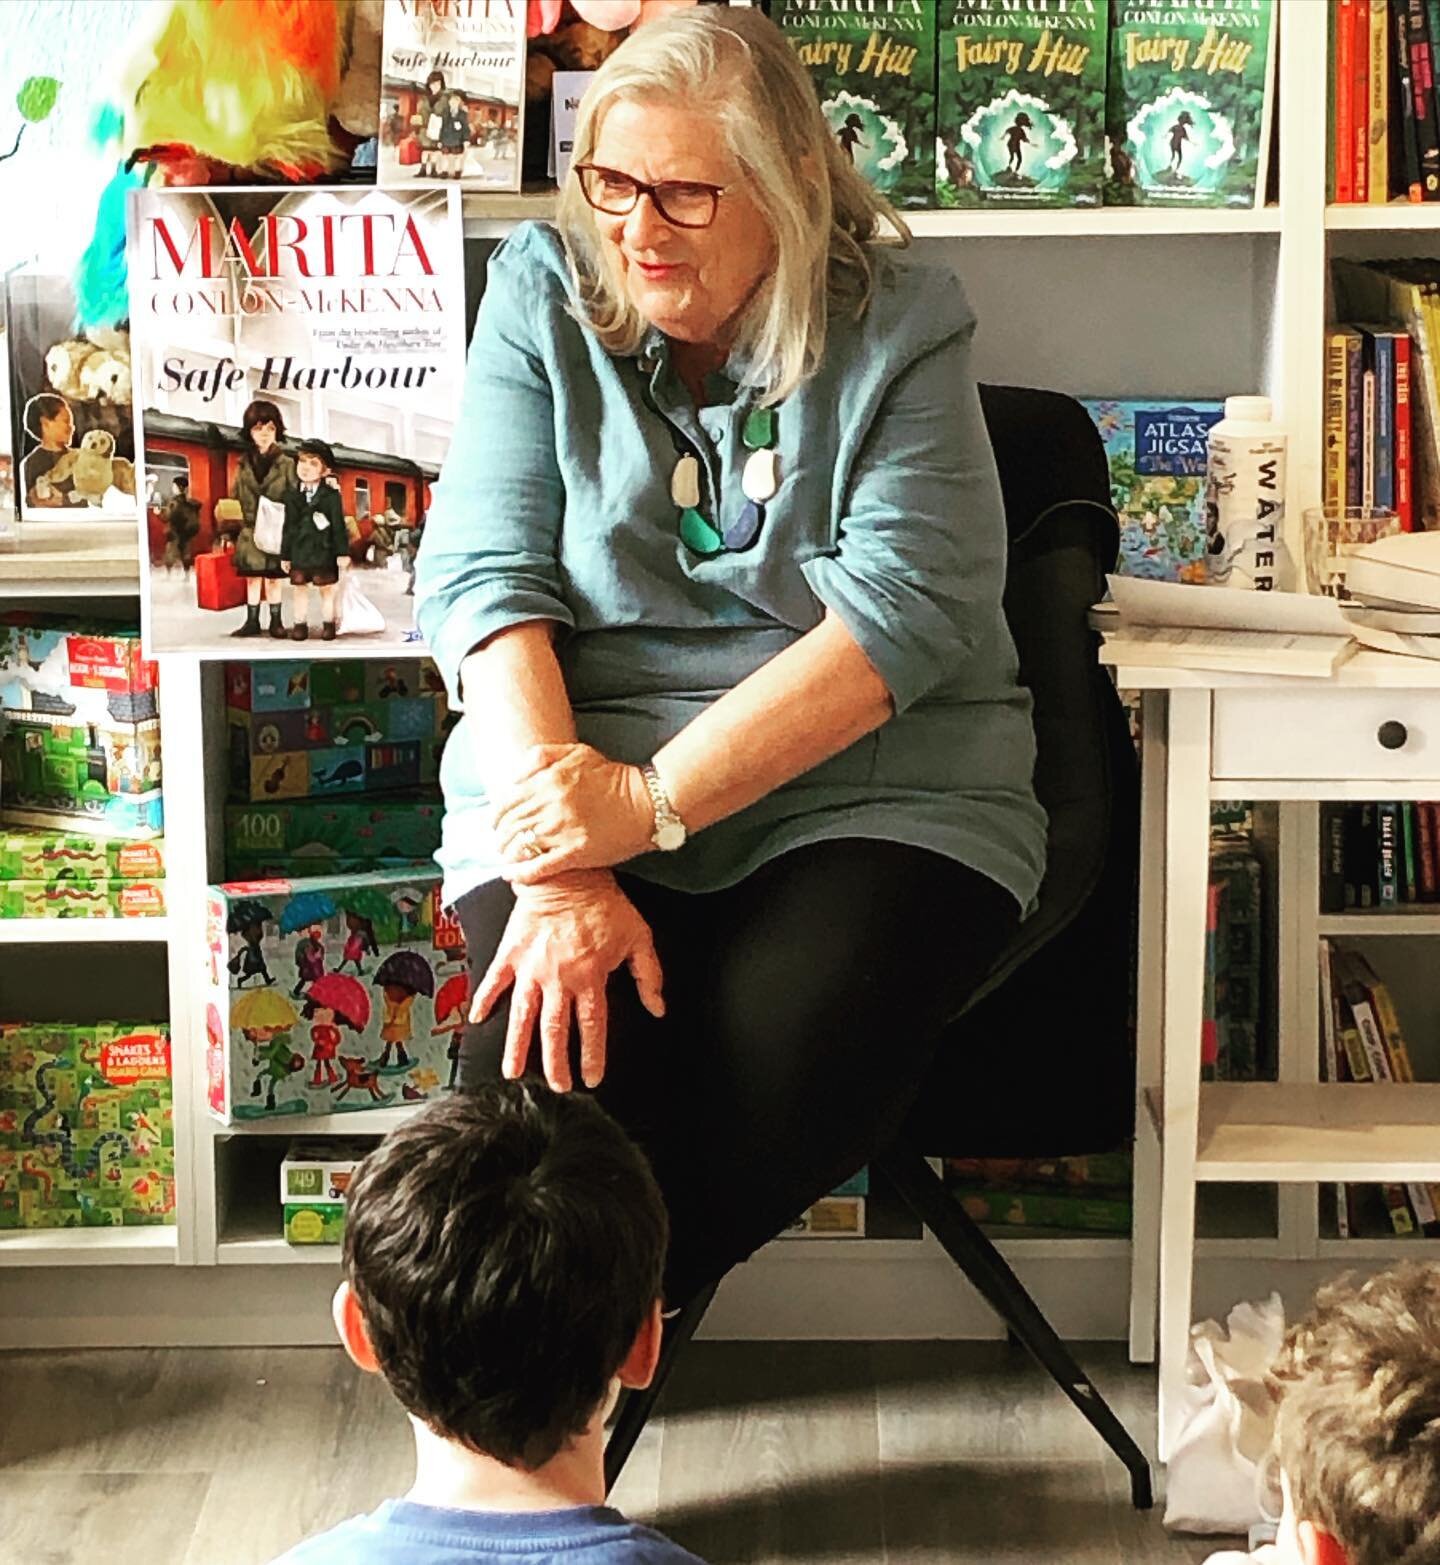 We are delighted to have Marita Conlon- McKenna @halfwayupthestairsbookshop today. She&rsquo;s talking about her new edition of Safe Harbour, set in Greystones. @theobrienpress #kidsbooks #kidsbookstagram #kidsbookswelove #childrensbooks #childrensbo